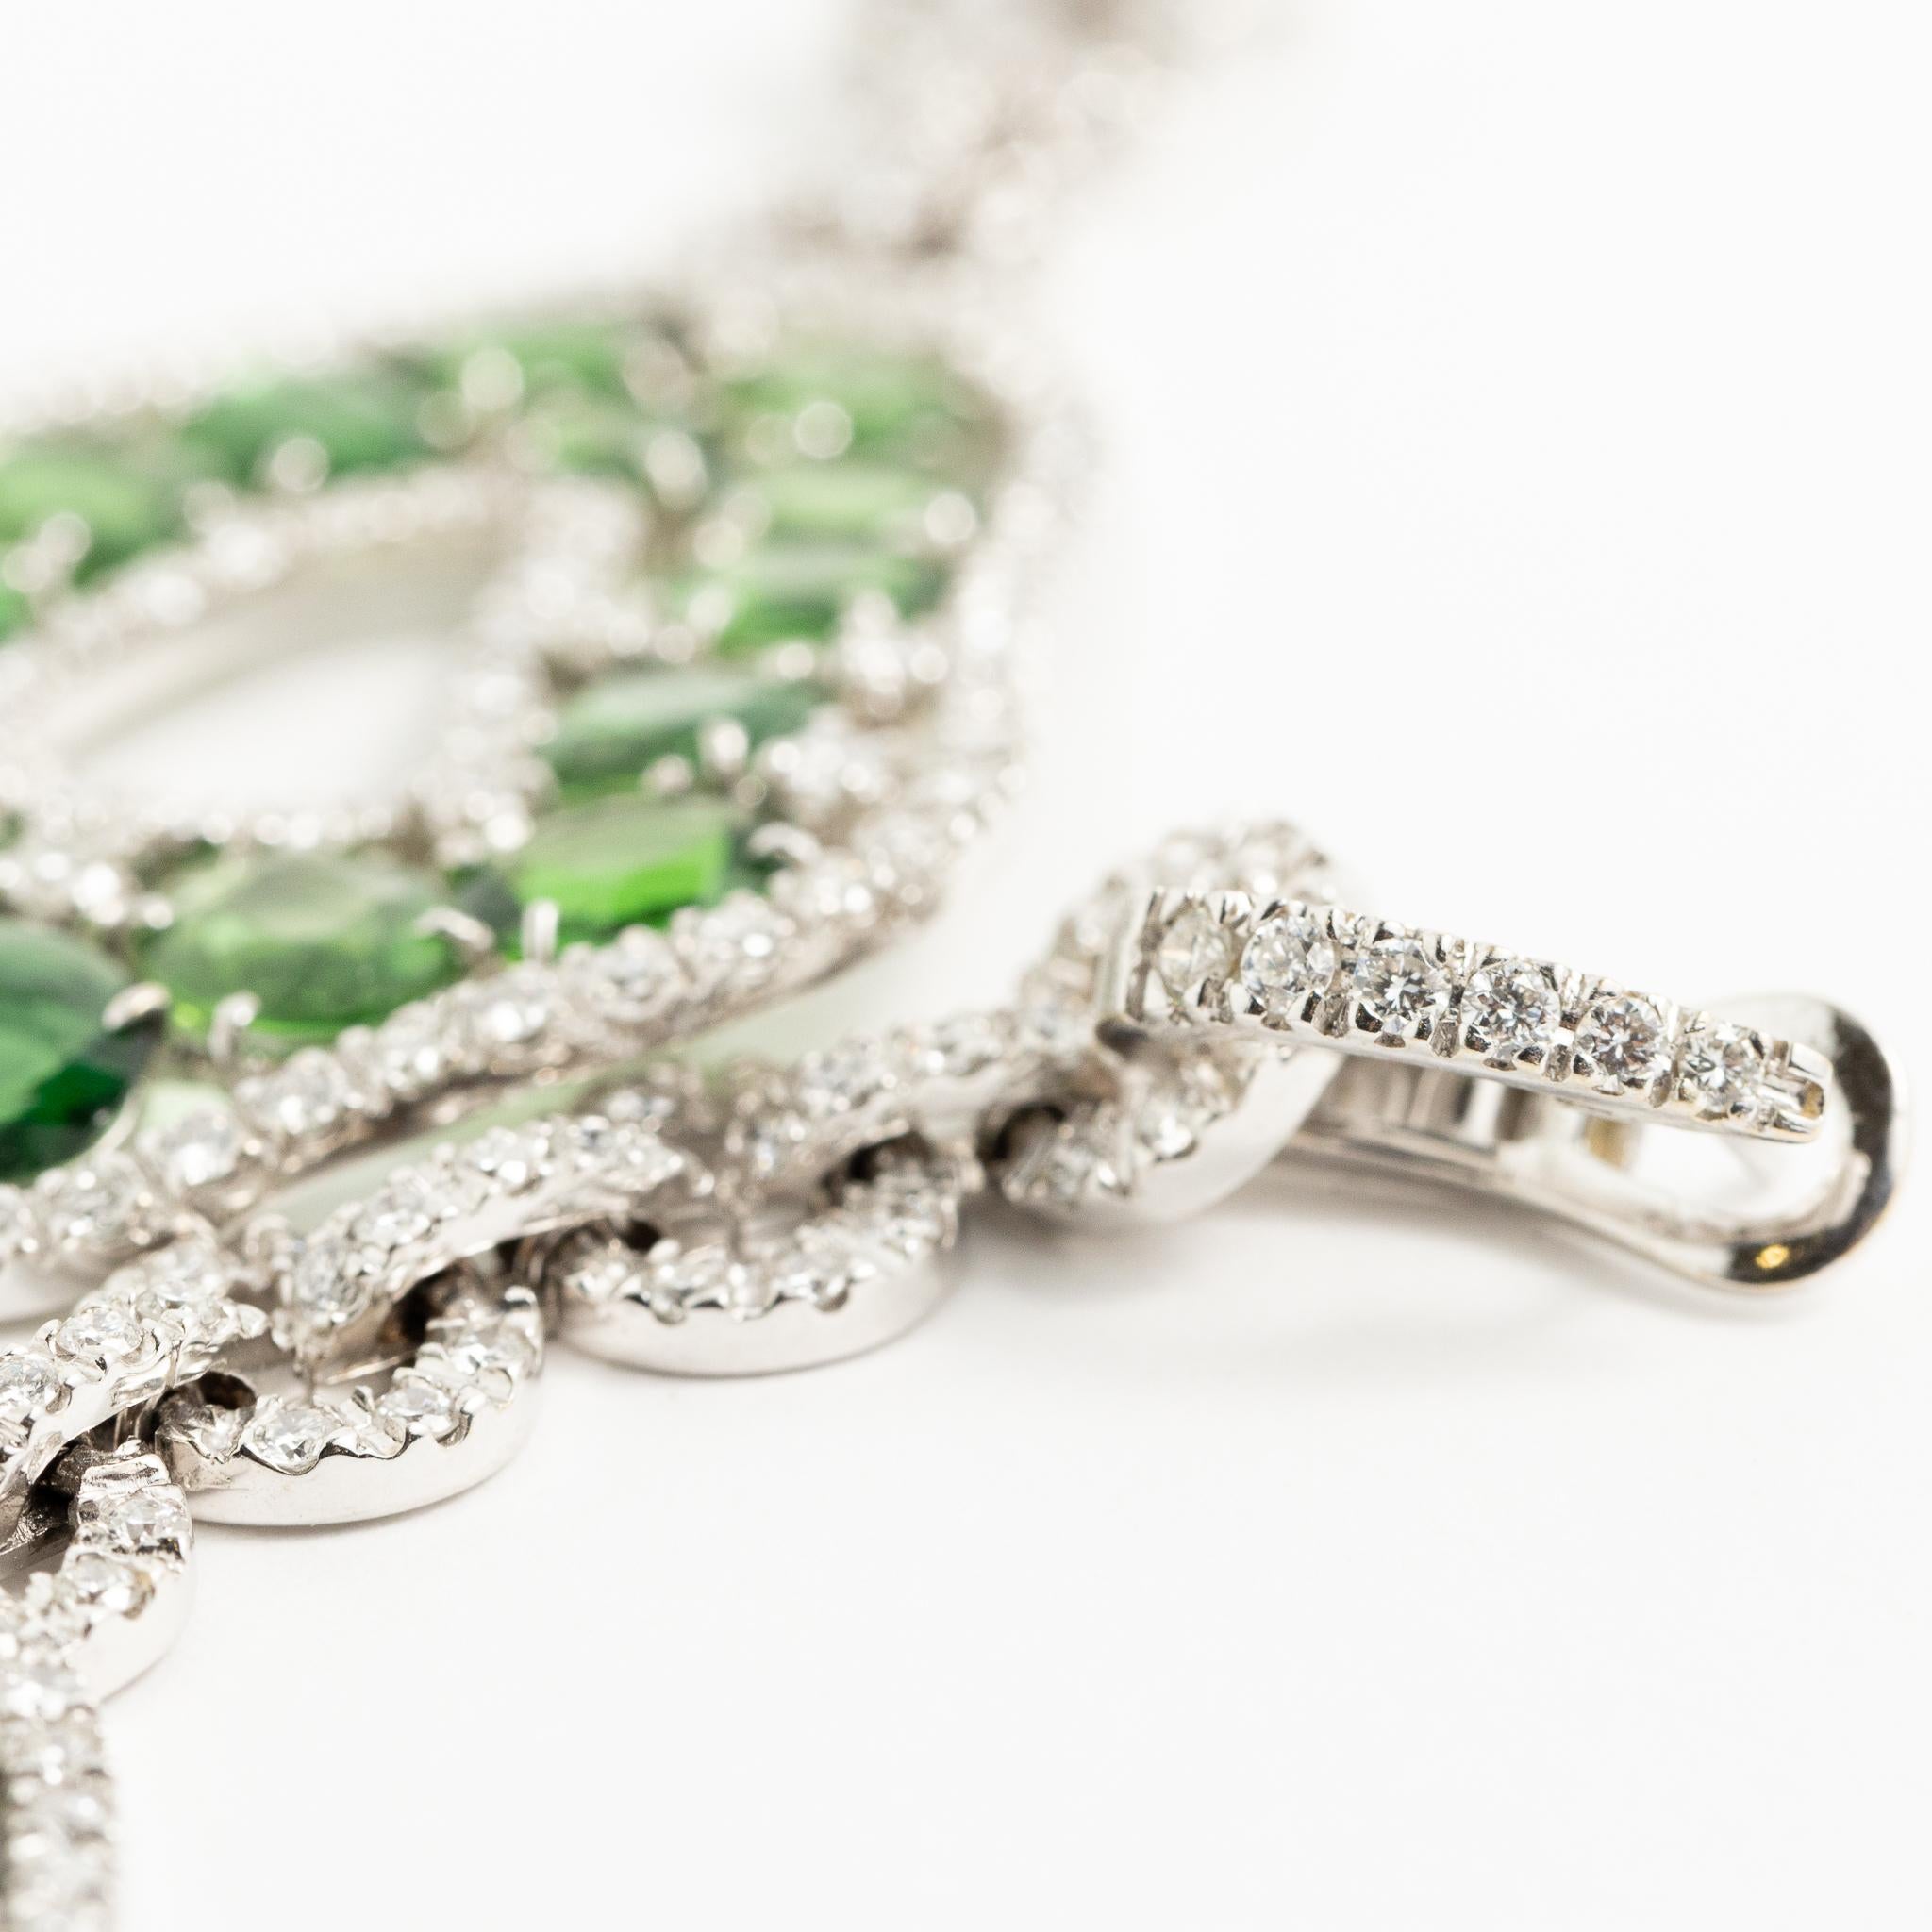 Fraleoni 18 Kt. White Gold Diamonds Green Tourmalines Earrings In New Condition For Sale In Rome, IT